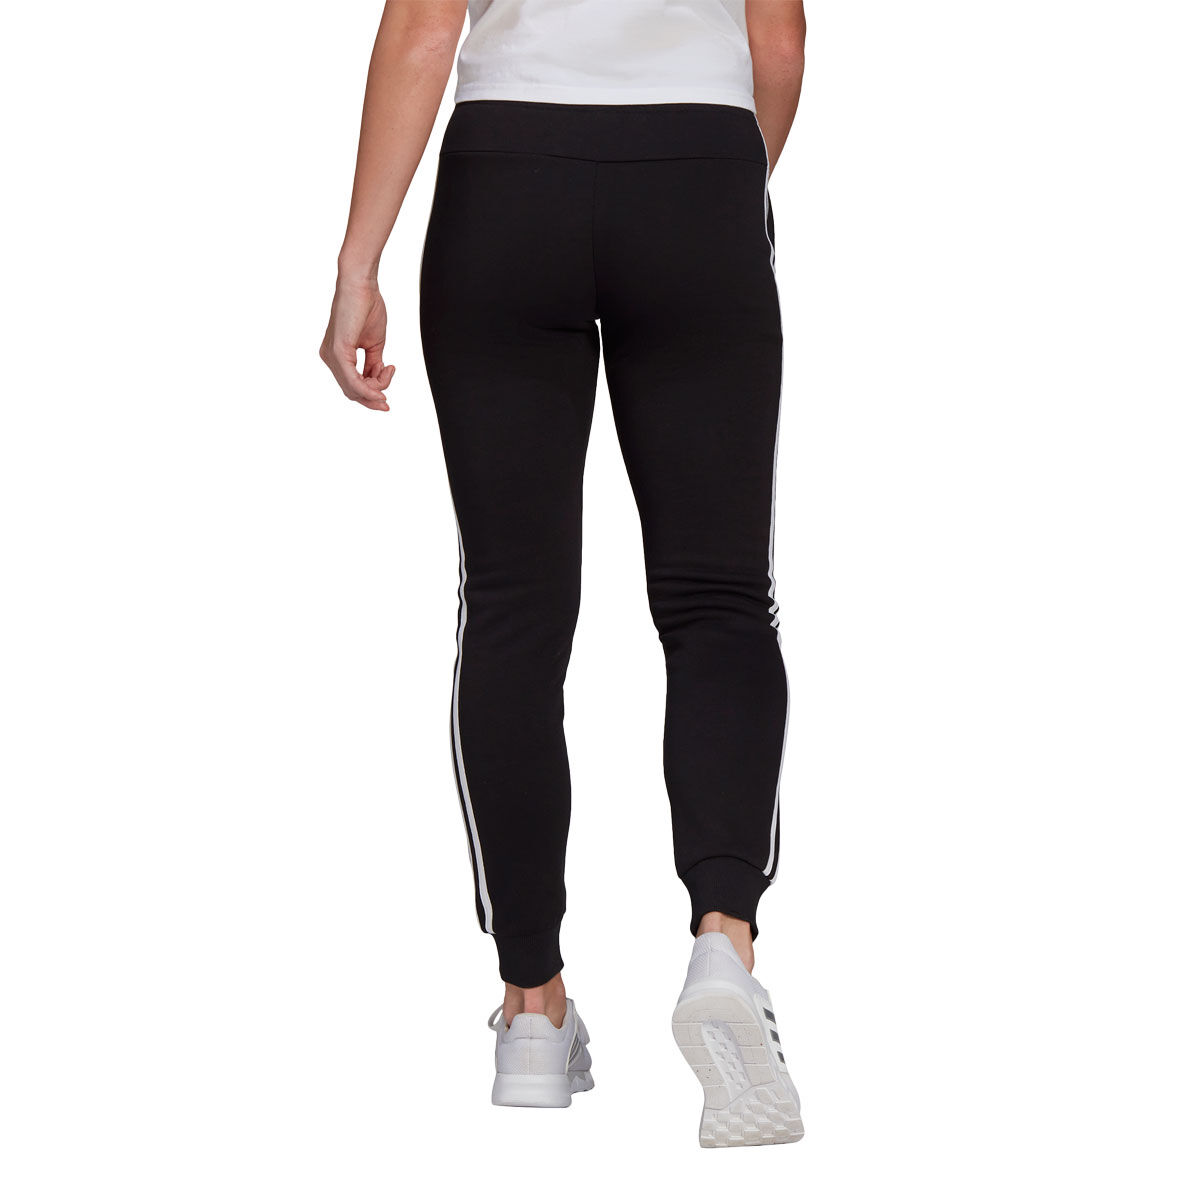 Adidas NWT Women's 3 Striped Training Leggings Size M - $32 - From